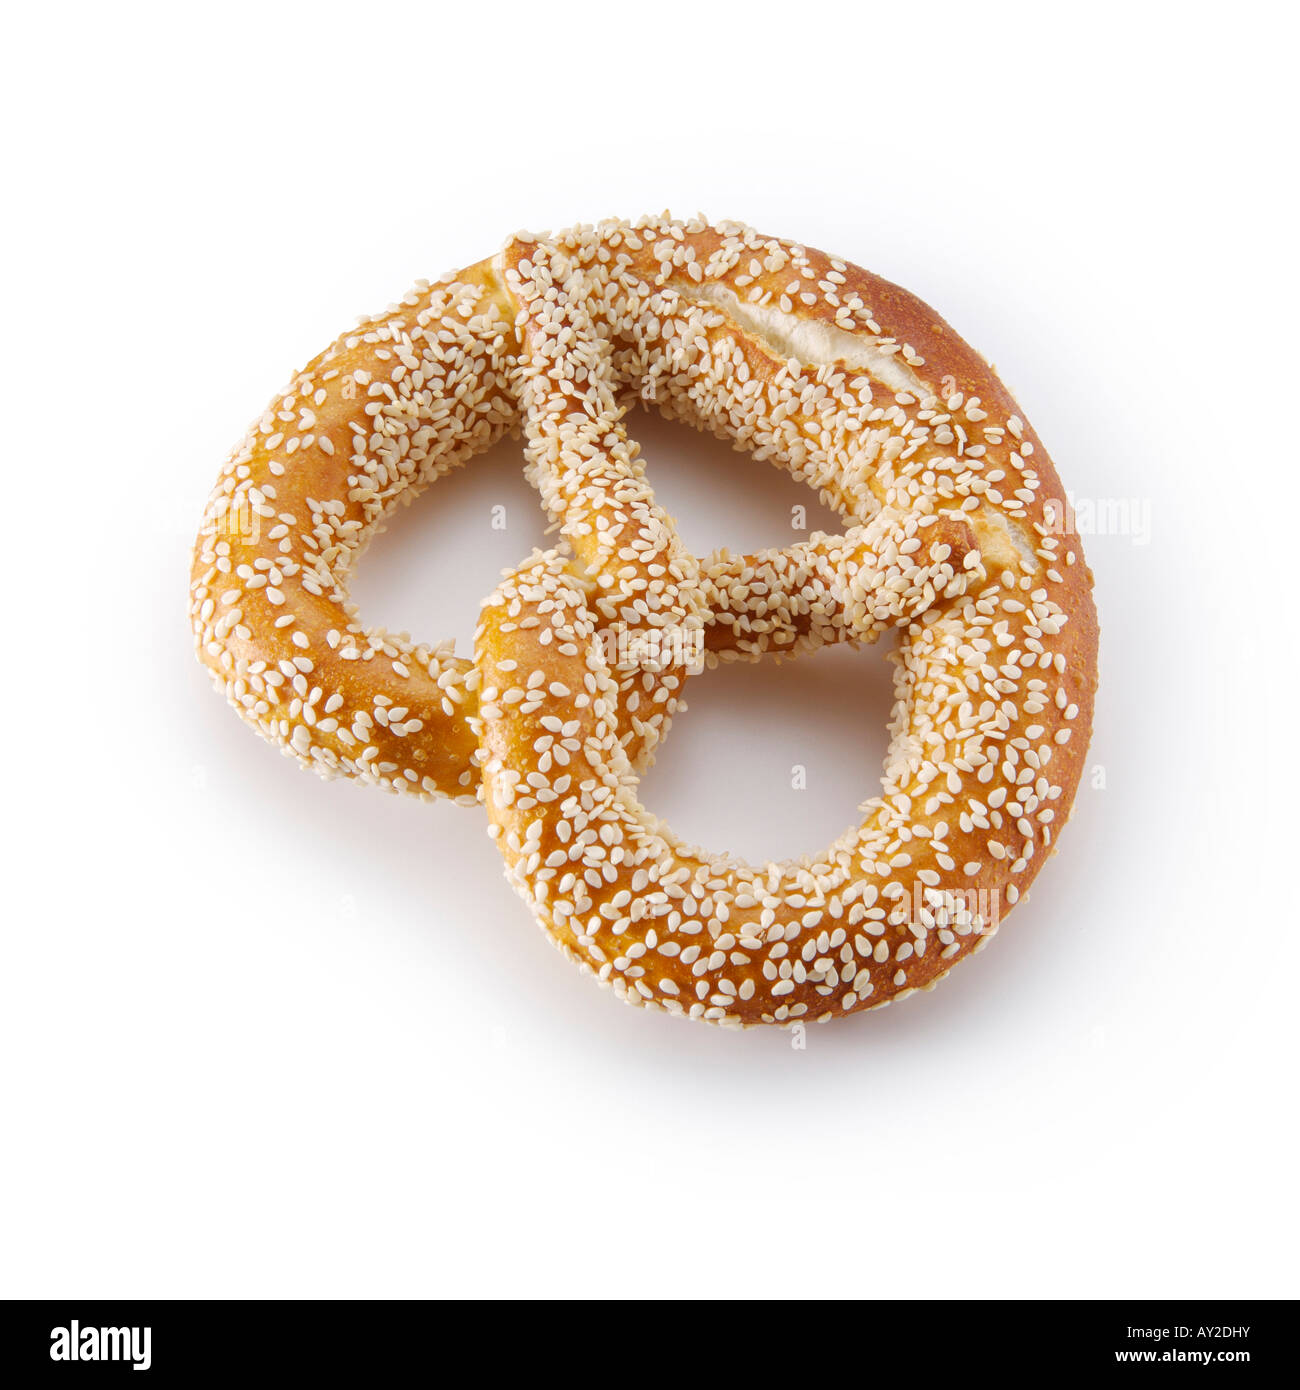 Bretzel on white background with clipping path Banque D'Images